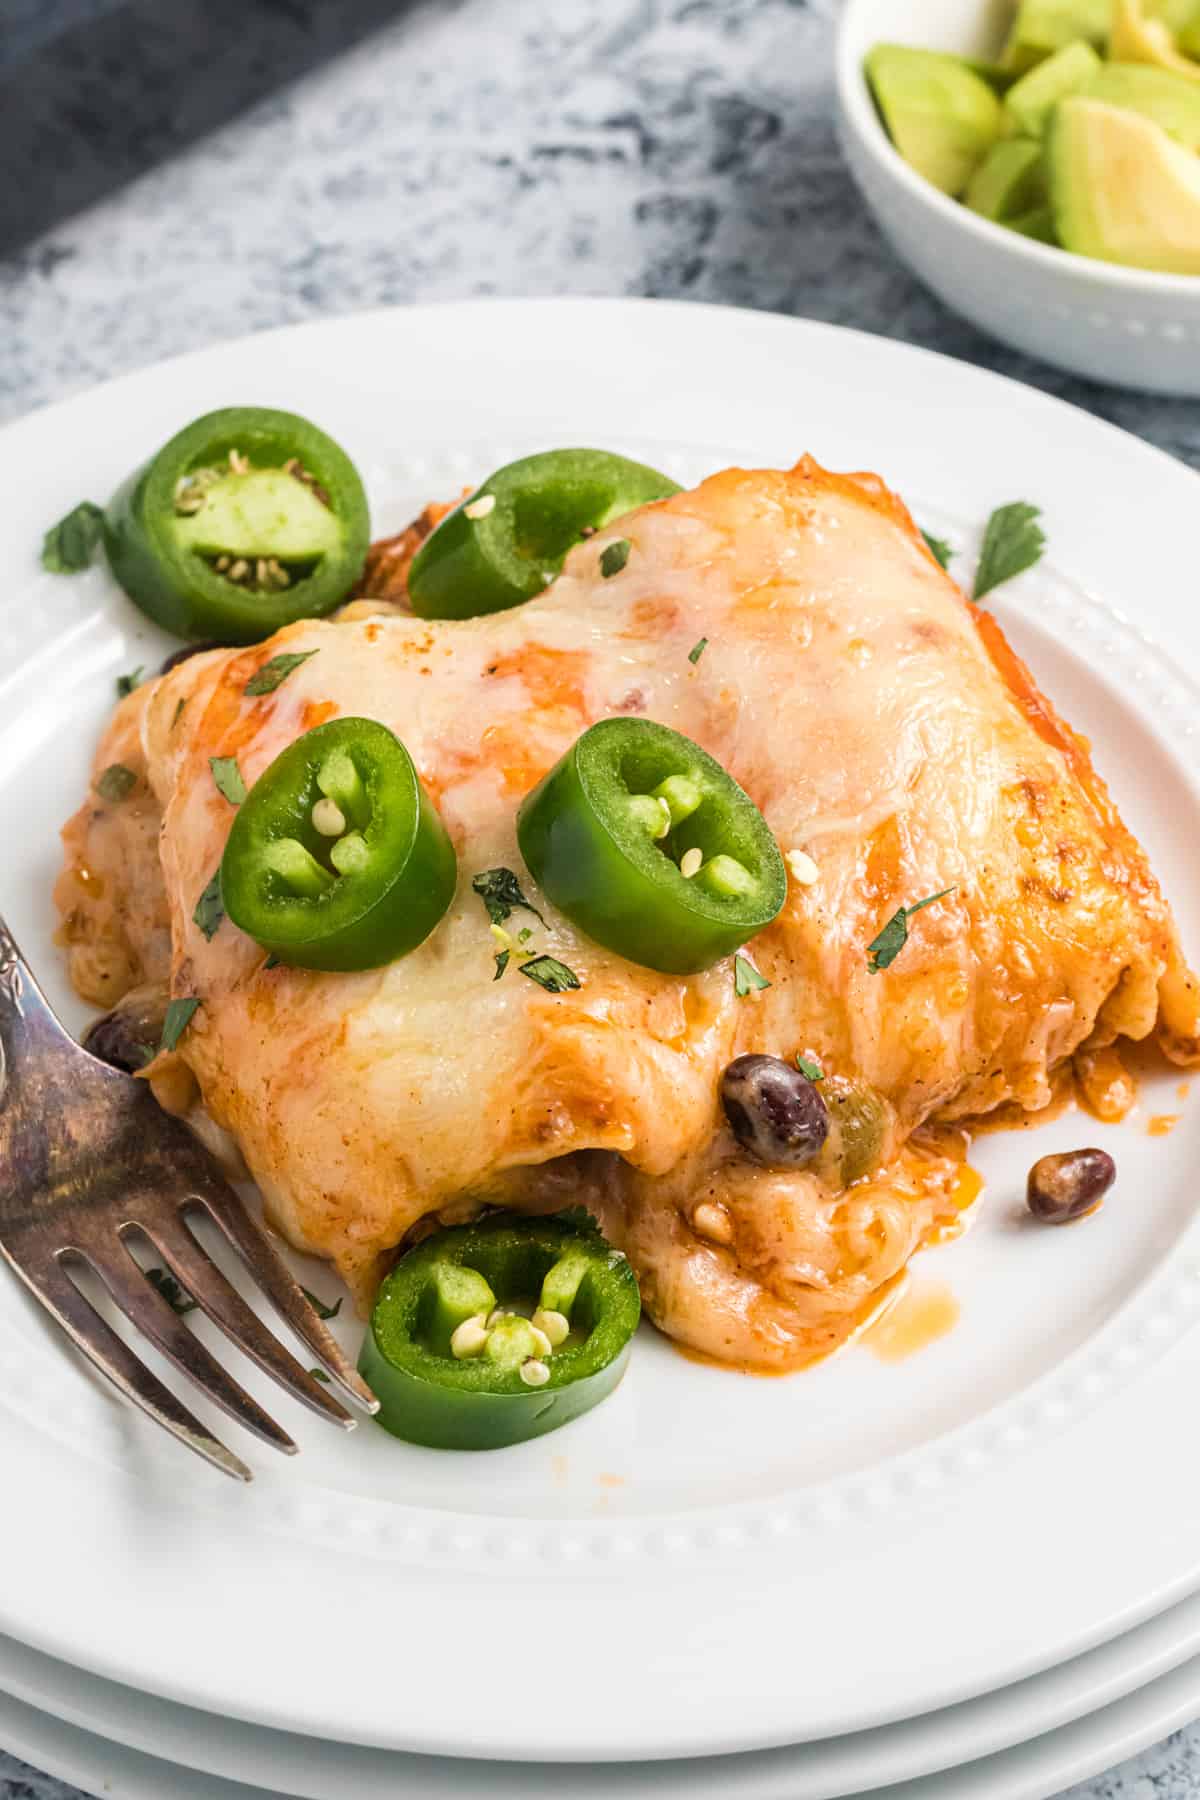 Several enchiladas are placed on a white plate and garnished with chopped jalapenos.